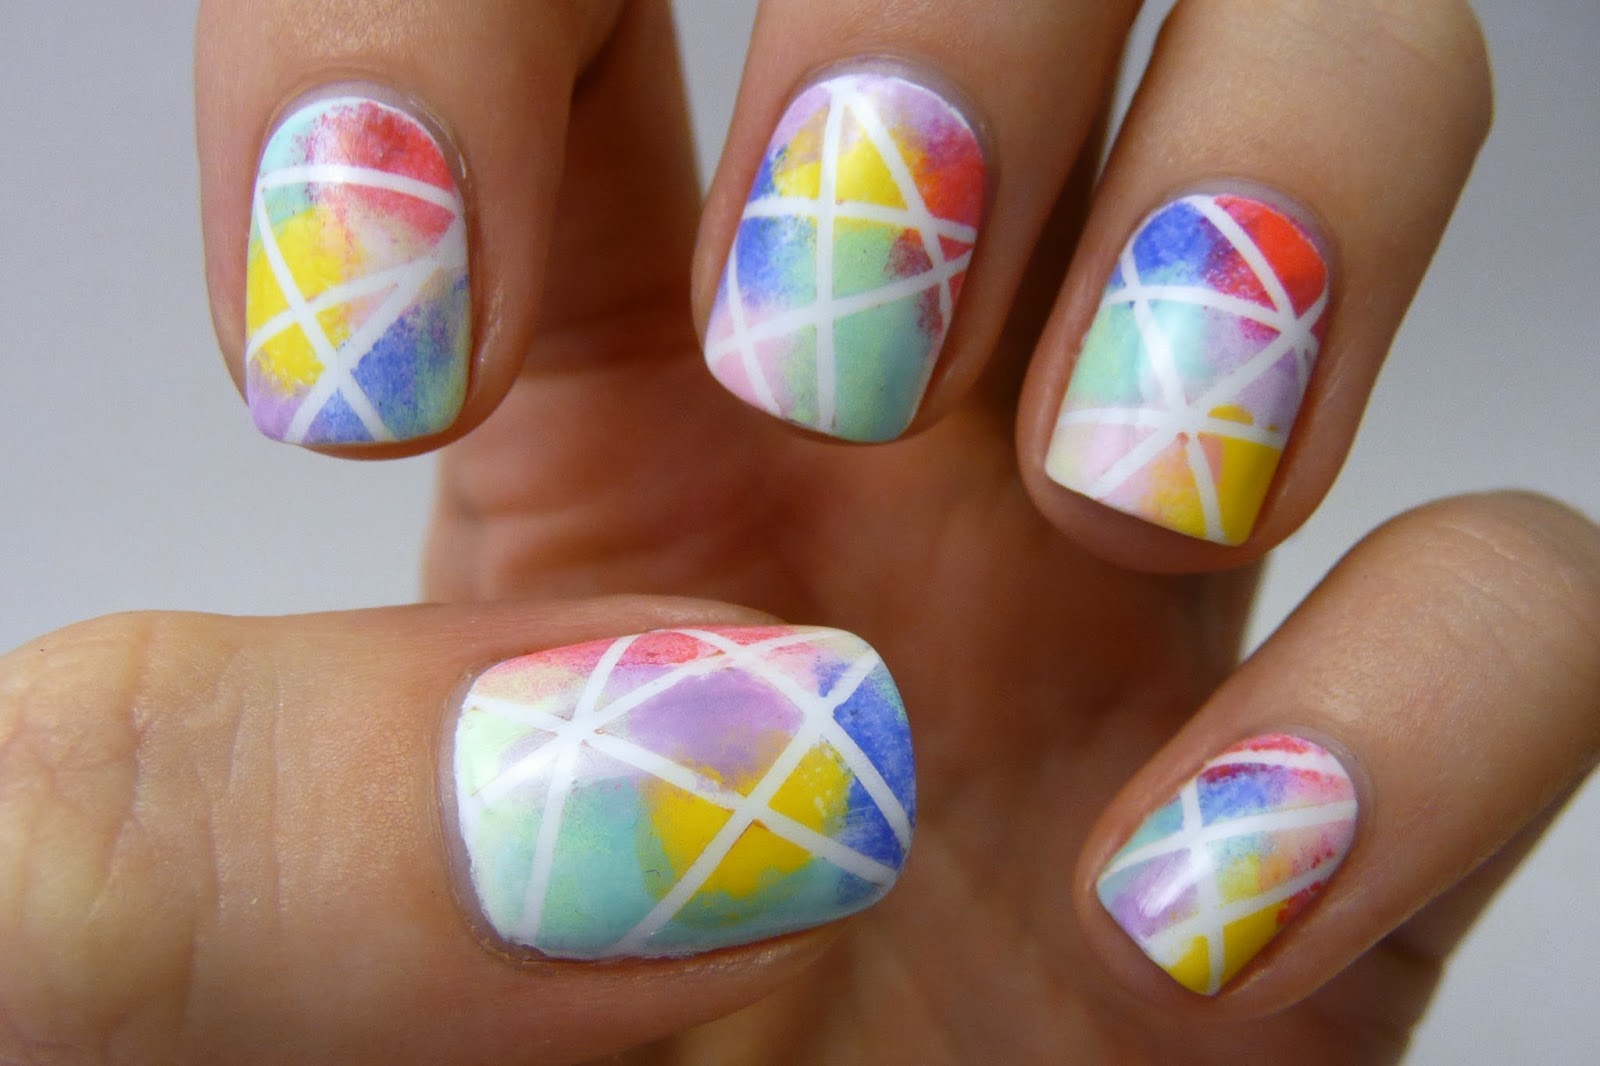 2. Easy Nail Polish Tape Designs - wide 10